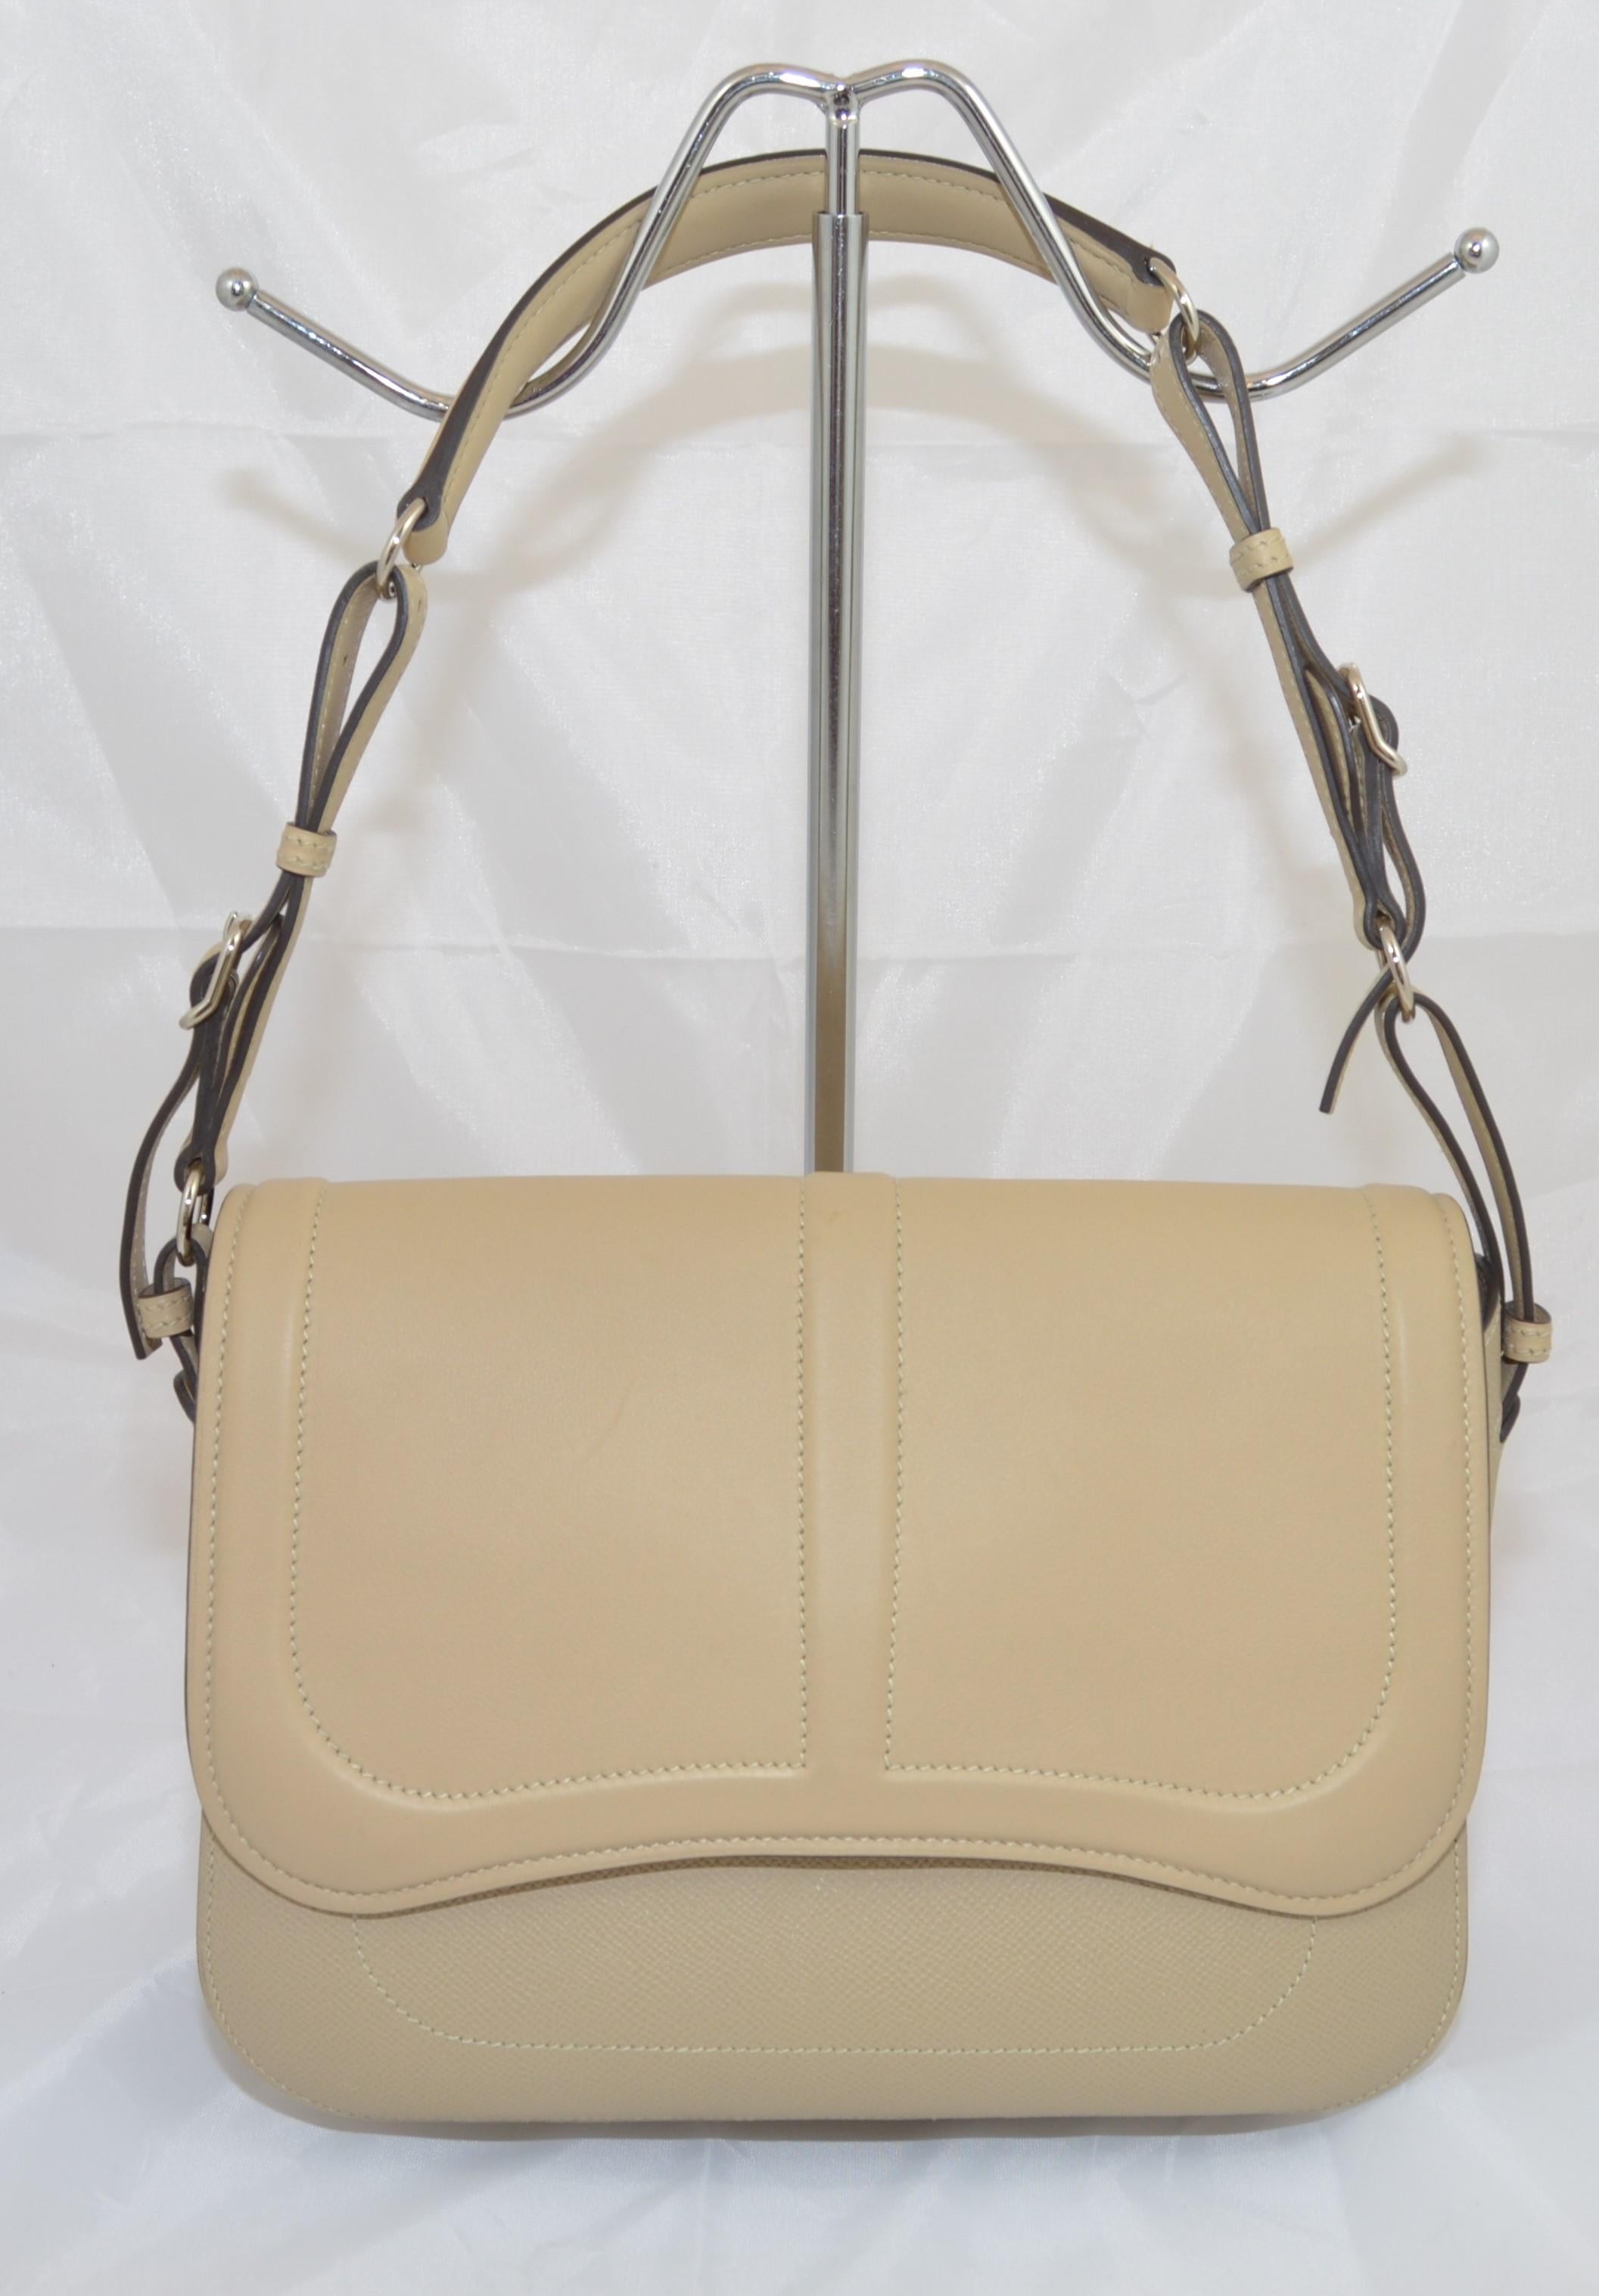 Hermes Harnais khaki-colored shoulder bag features an adjustable leather shoulder strap with polished palladium hardware, and a leather crossover flap. Interior is fully lined in leather with patch pockets. Bag is stamped X (no shape) dating it to